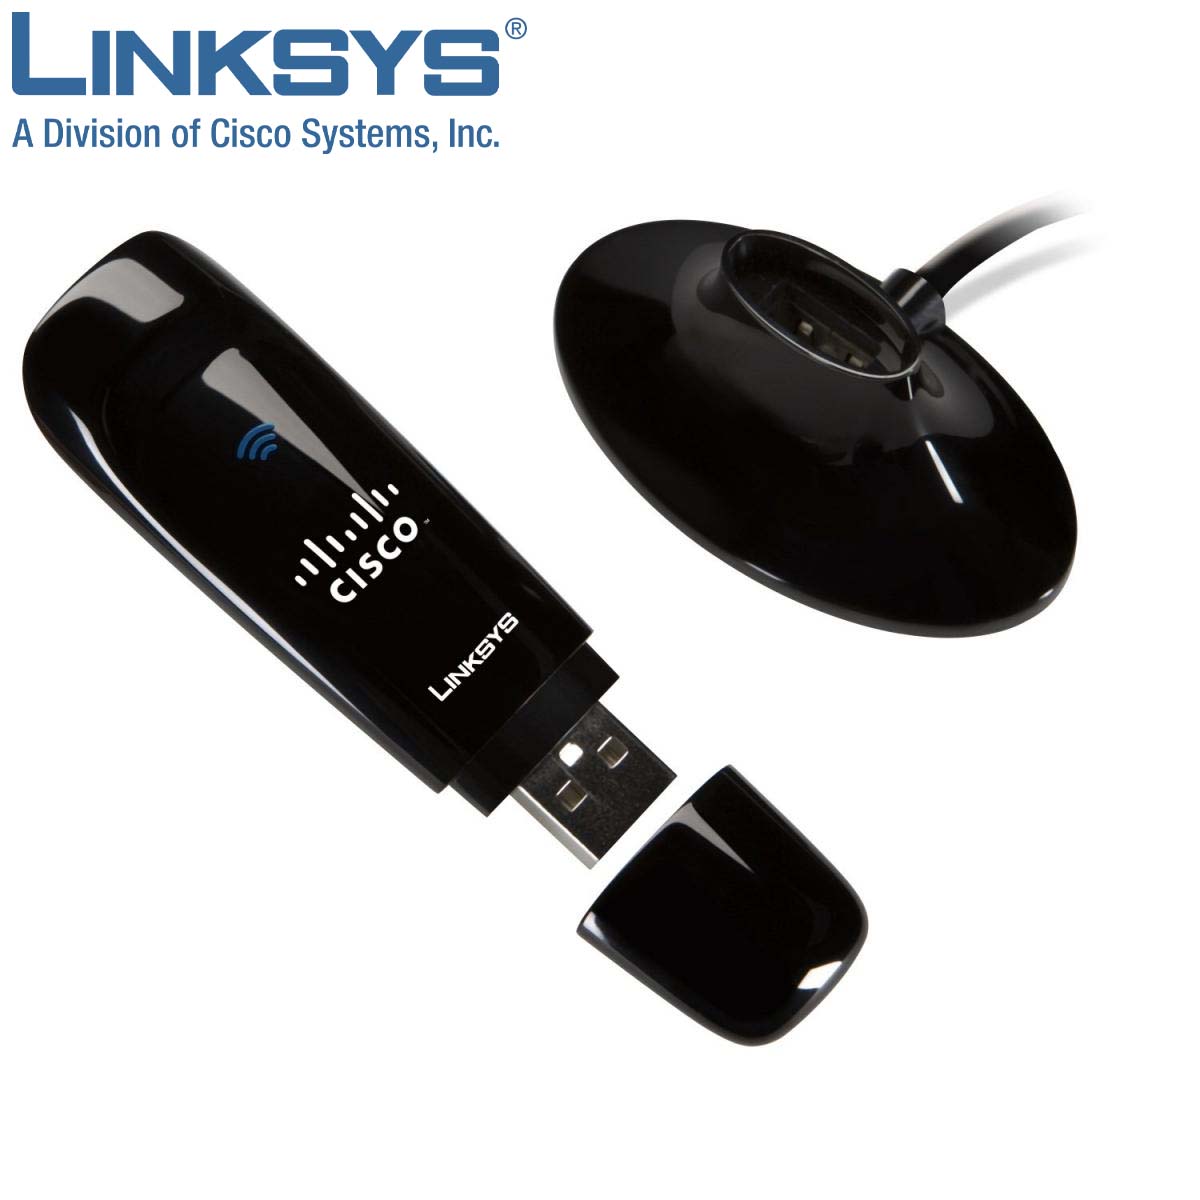 Linksys By Cisco WUSB600n Wireless-N USB Network Adapter With Dual-Band